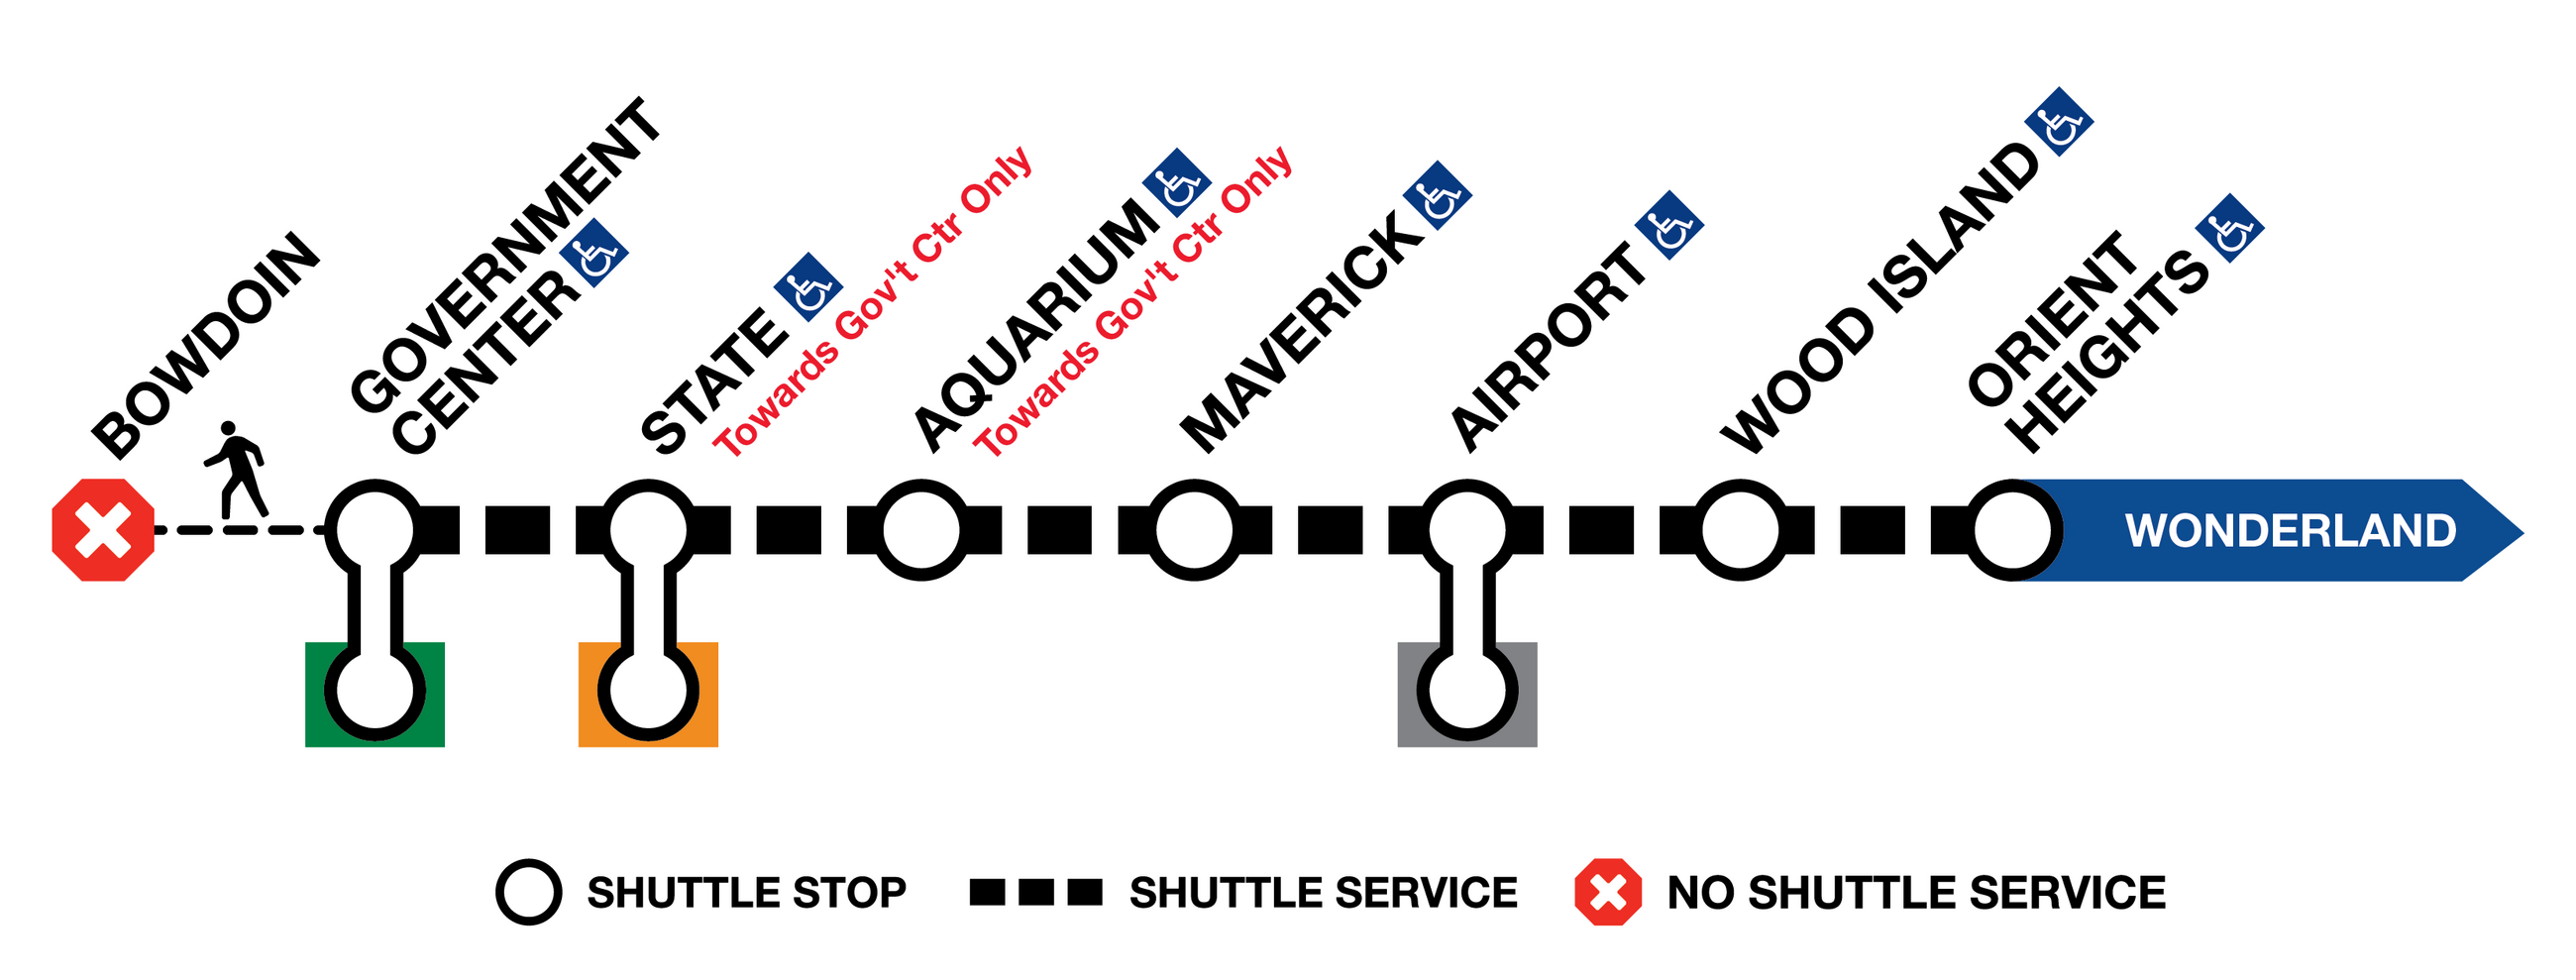 Shuttle service graphic for the Blue Line Bowdoin to Orient Heights early access diversion